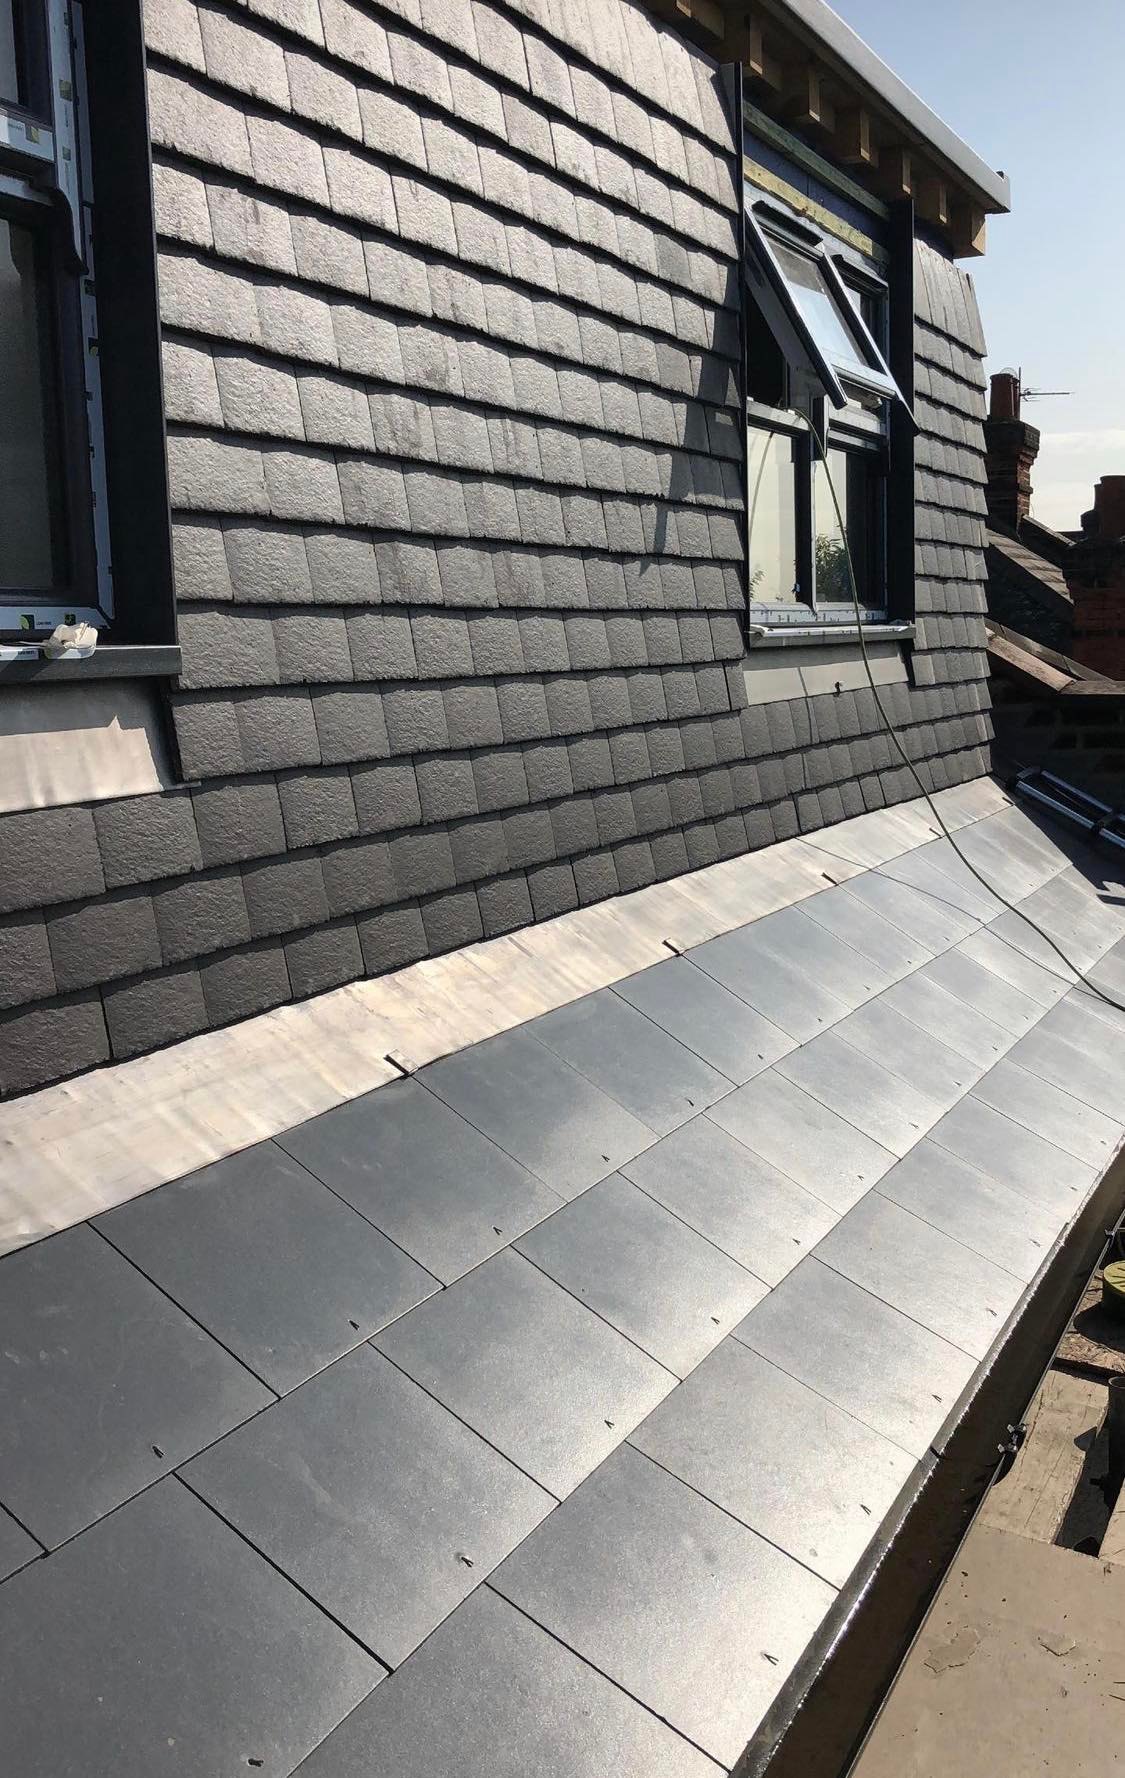 New lead flashing and tiles installed on a roof